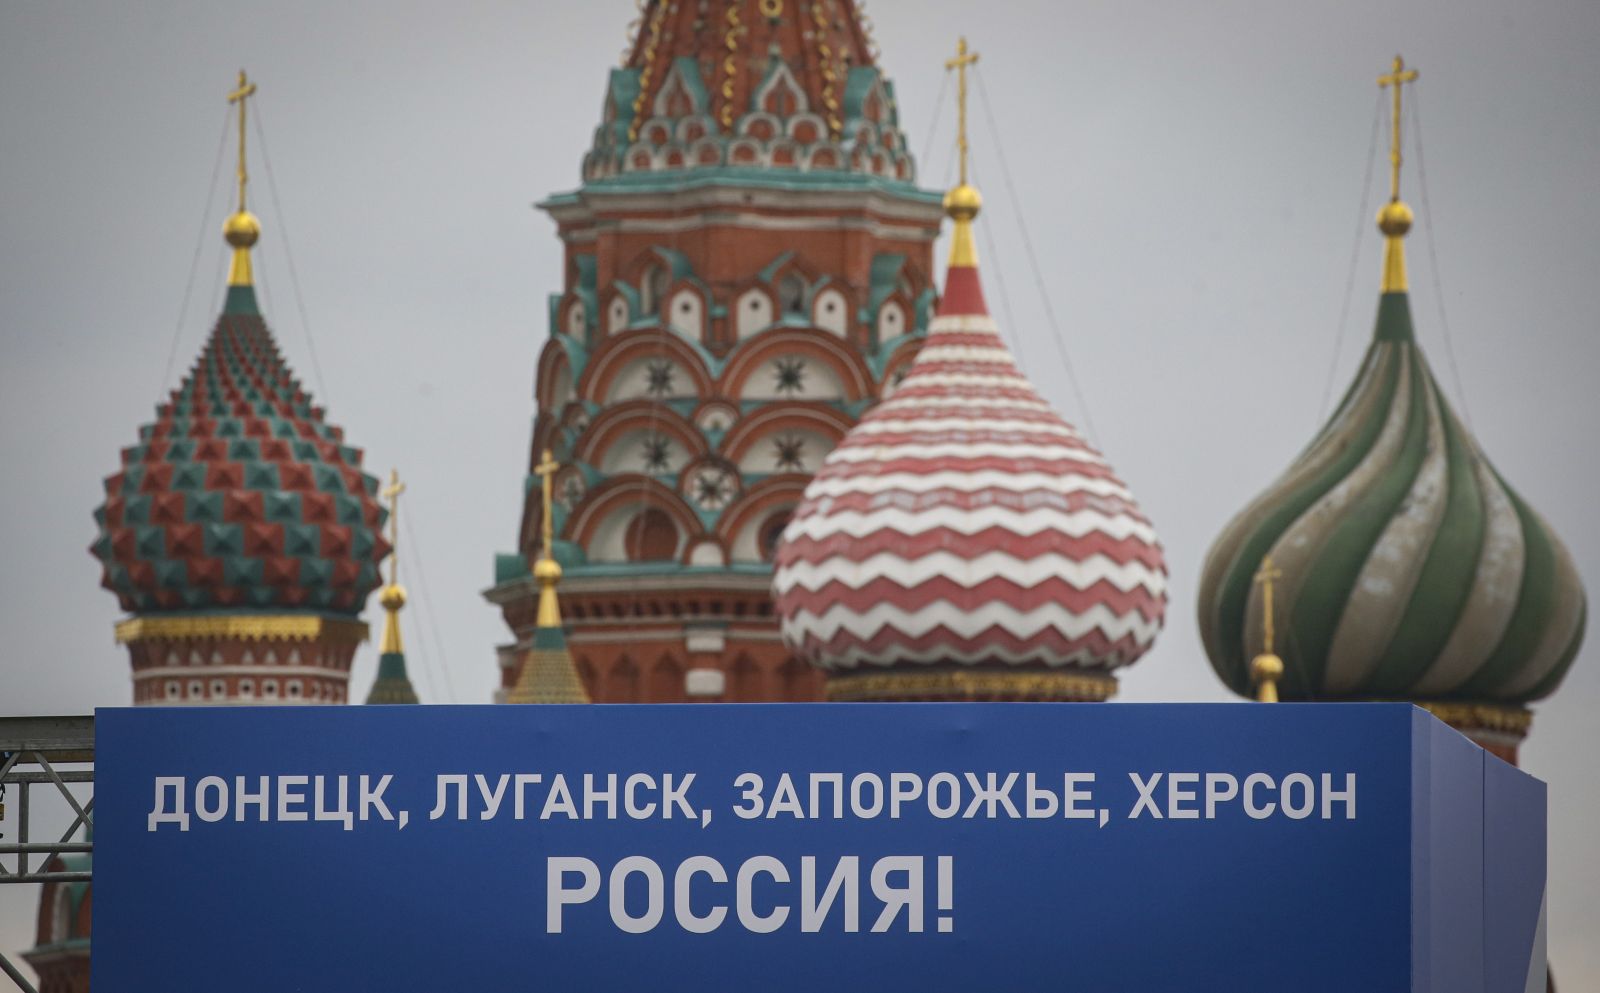 epa10213768 A stage featuring a sign reading 'Donetsk, Luhansk, Zaporozhye, Kherson Russia' during preparations for a celebration in front of St. Basil's Cathedral in downtown of Moscow, Russia, 29 September 2022. From 23 to 27 September, residents of the self-proclaimed Luhansk and Donetsk People's Republics as well as the Russian-controlled areas of the Kherson and Zaporizhzhia regions of Ukraine voted in a so-called 'referendum' to join the Russian Federation. Russian President Vladimir Putin will hold a signing ceremony September 30 to annex four more areas of Ukraine after the referendums condemned by Ukraine and the West as a sham.  EPA/SERGEI ILNITSKY